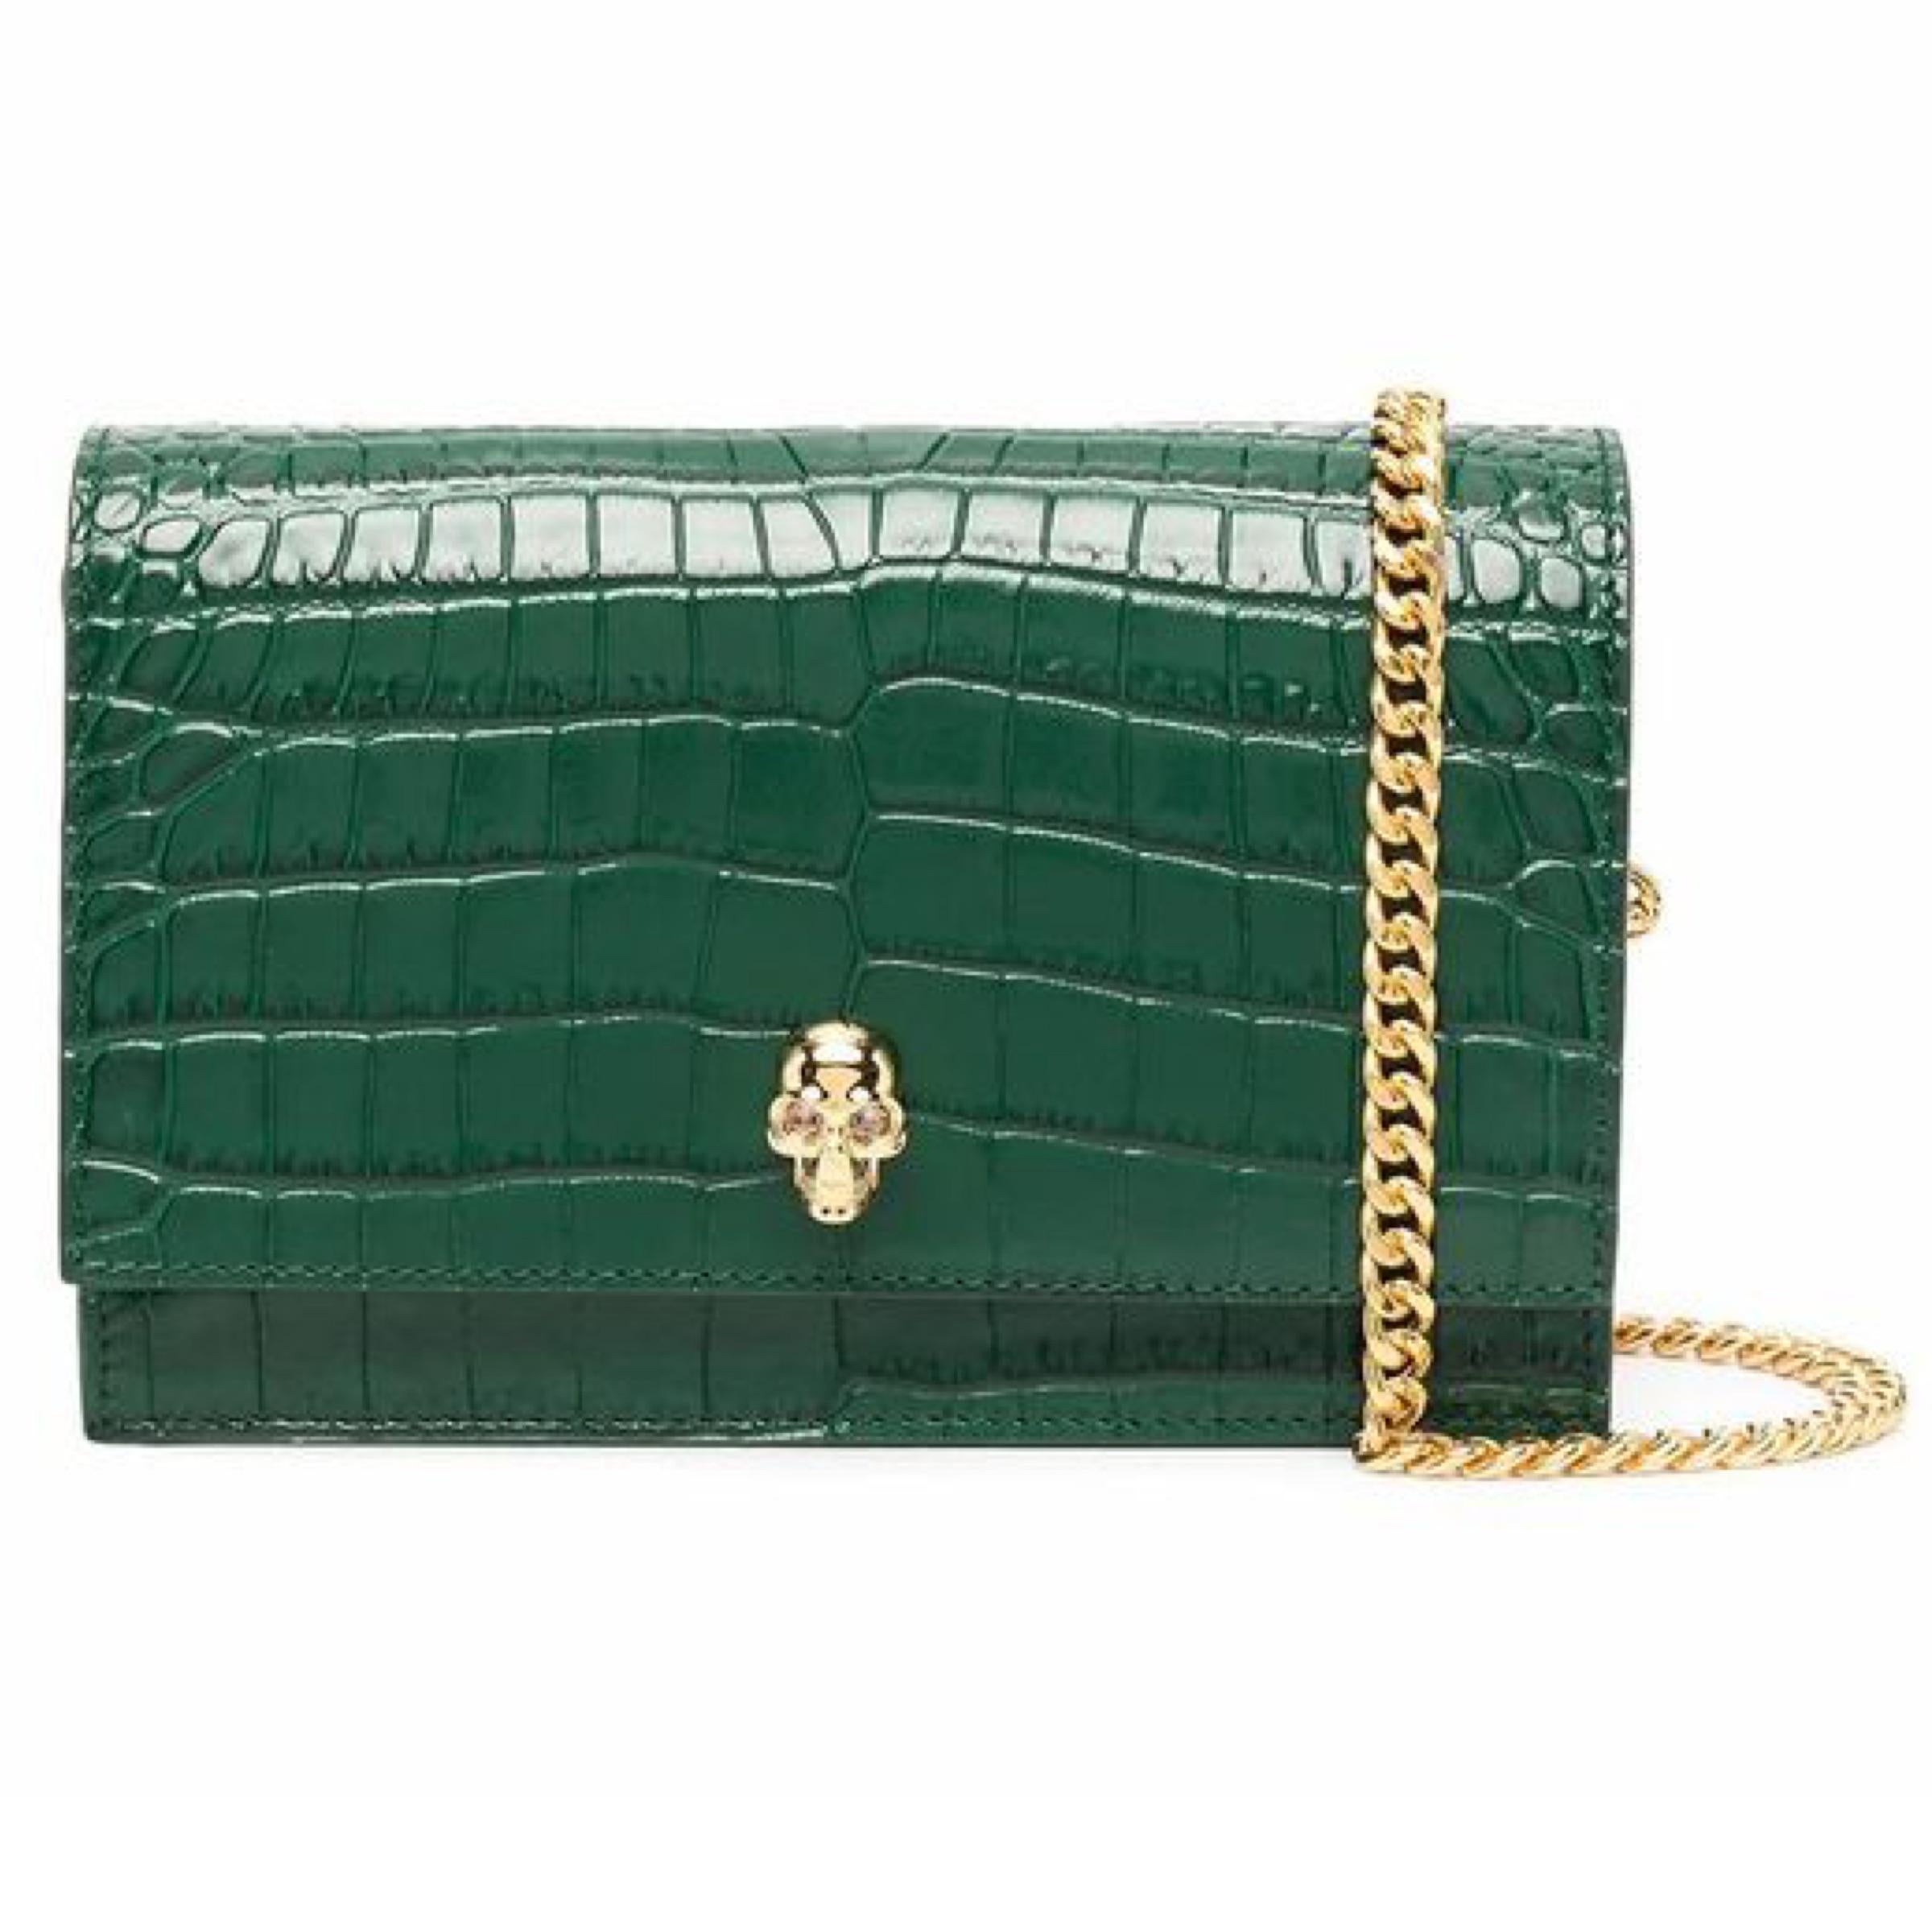 New Alexander McQueen Emerald Green Small Skull Crocodile Embossed Leather Crossbody Bag

Authenticity Guaranteed

DETAILS
Brand: Alexander McQueen
Condition: Brand new
Gender: Women
Category: Crossbody bag
Color: Green
Material: Leather 
Crocodile